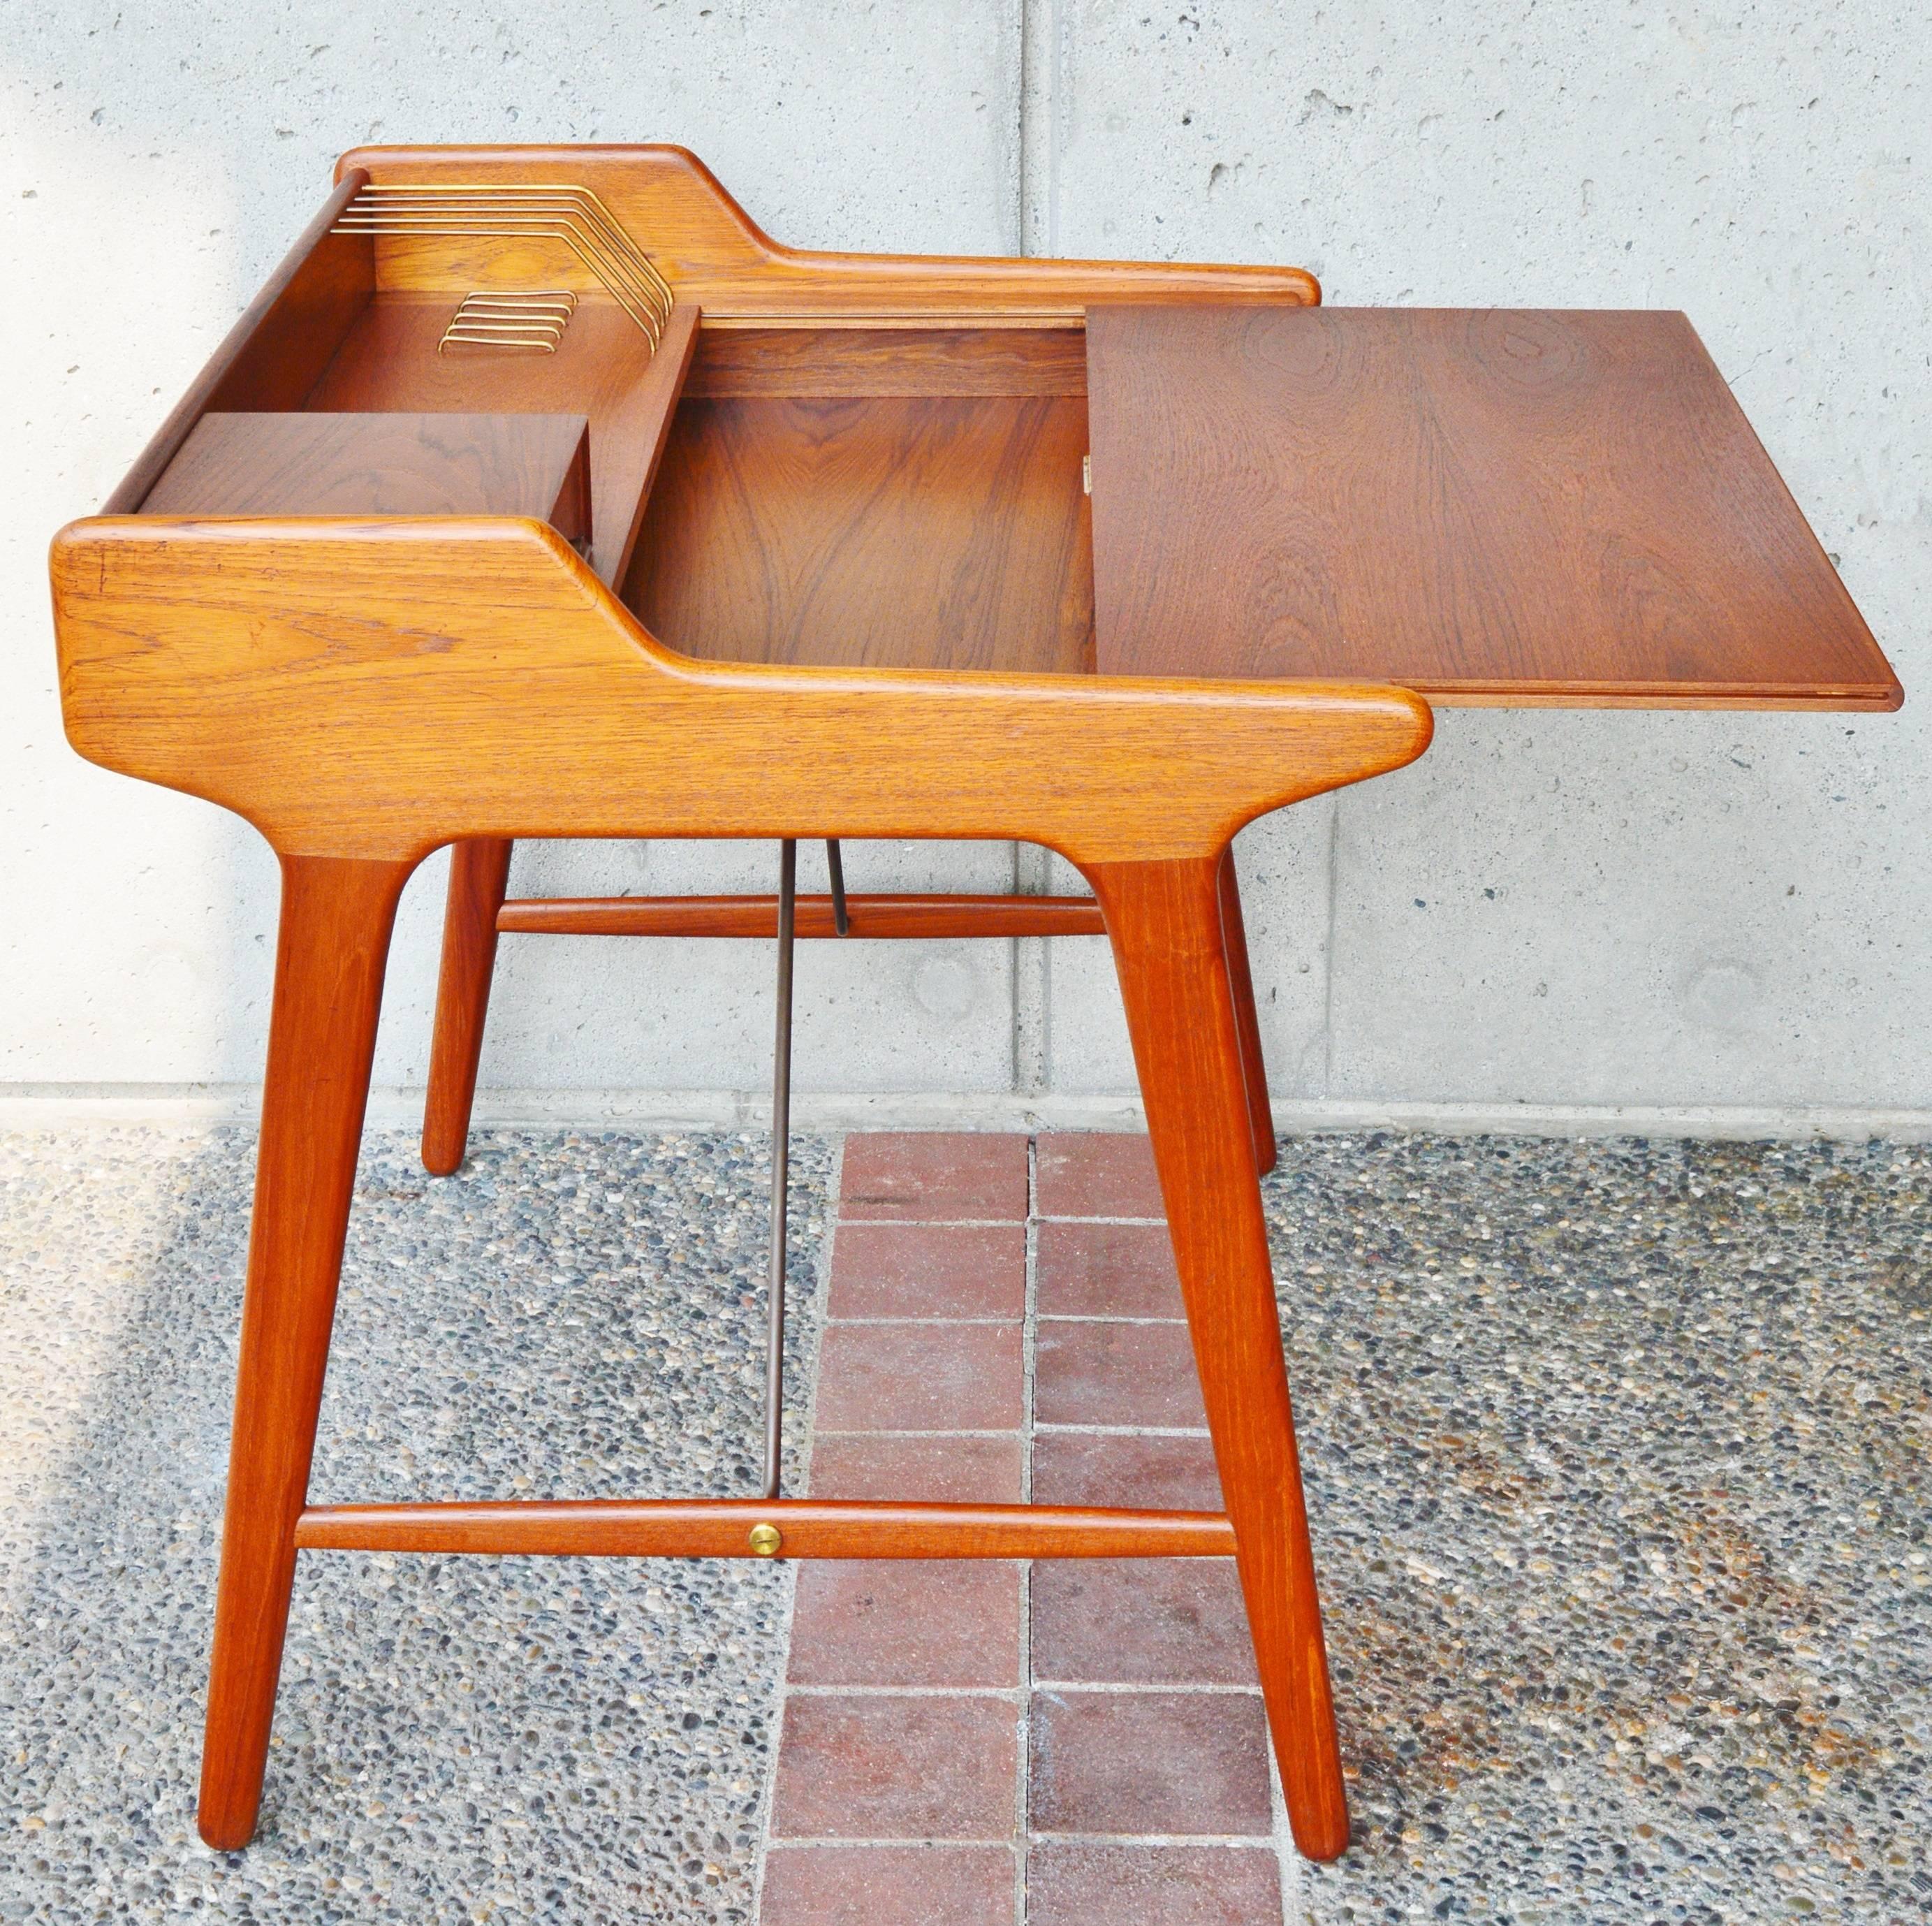 This iconic Danish modern Minimalist desk is a top quality design by acclaimed Danish architect and designer, Svend Madsen! Featuring all hardwood construction, the solid teak sides of the desk are beautifully sculpted and contour around the raised,